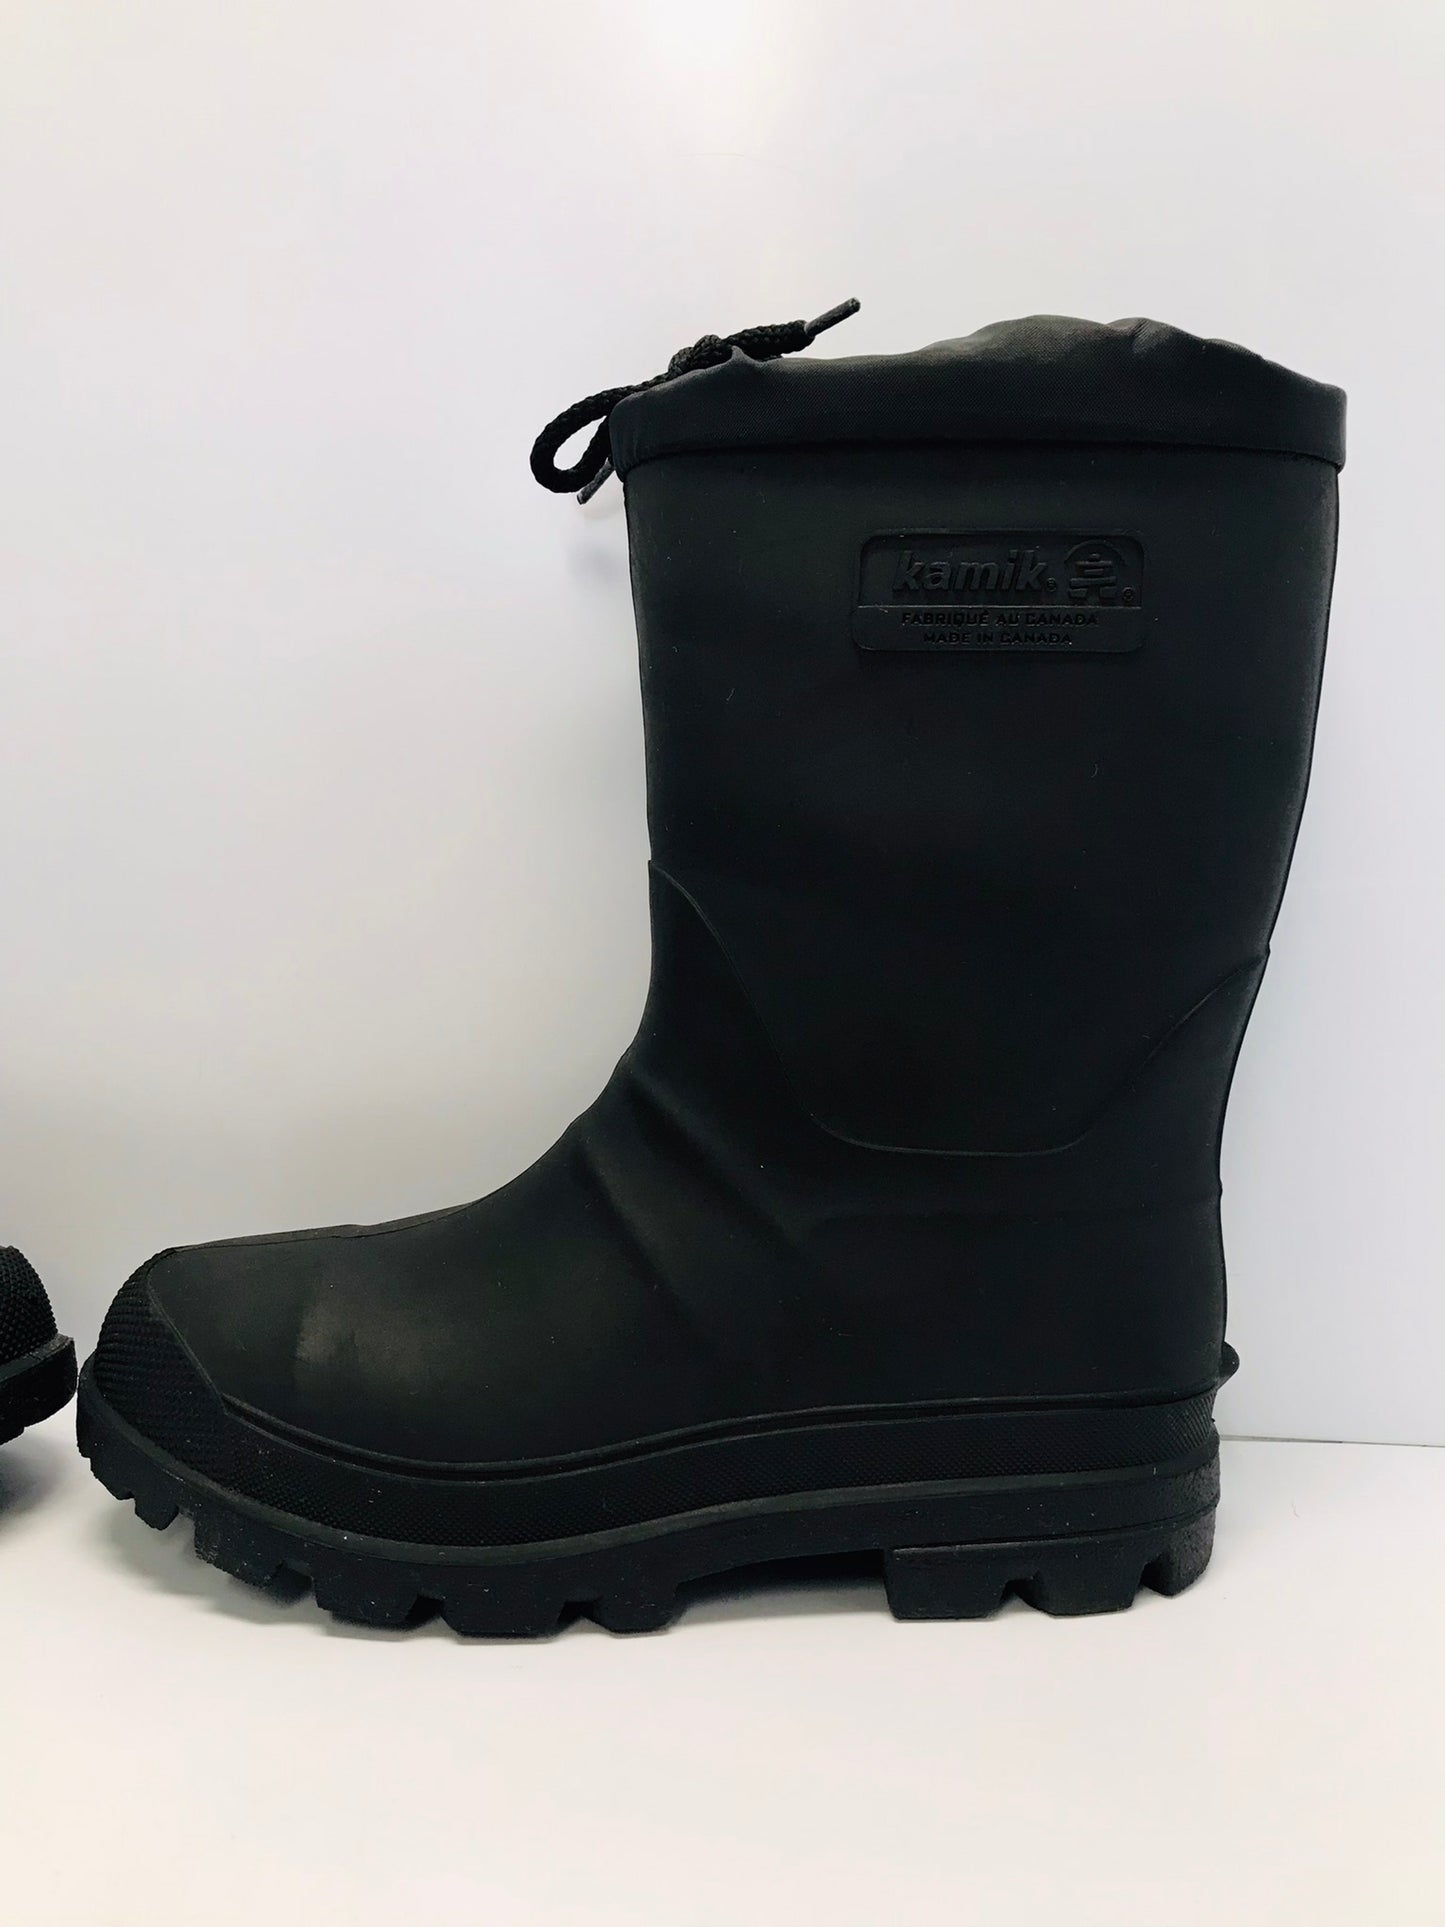 Rain Boots Men's Size 6 Kamik With Liner For Snow Black New Demo Model